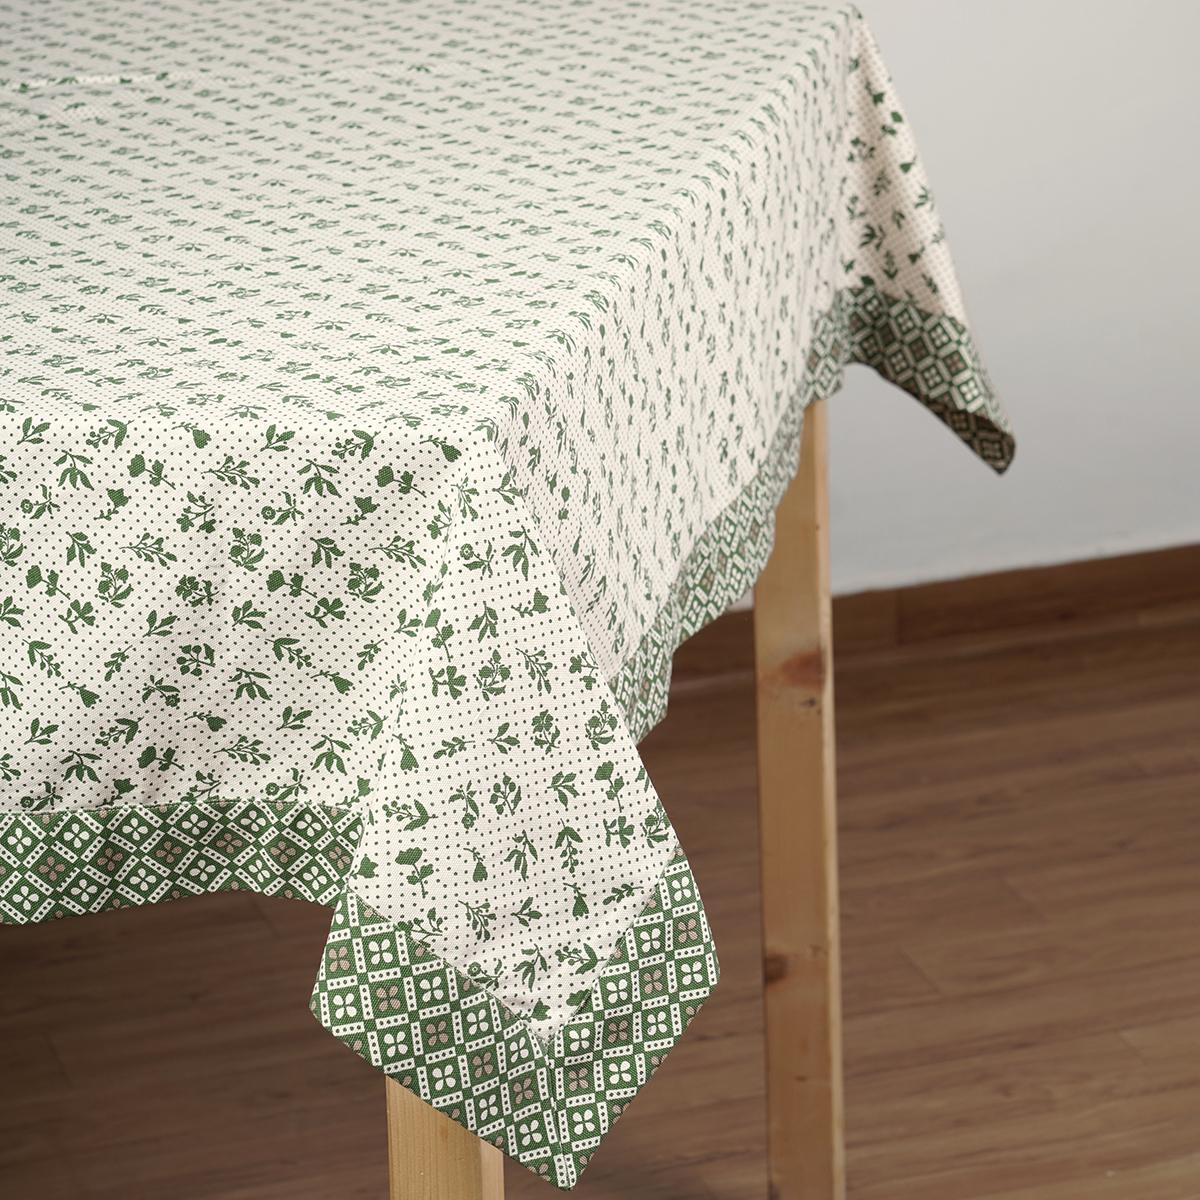 Green DOMINOTERIE small floral print cotton table cover with border, sizes available